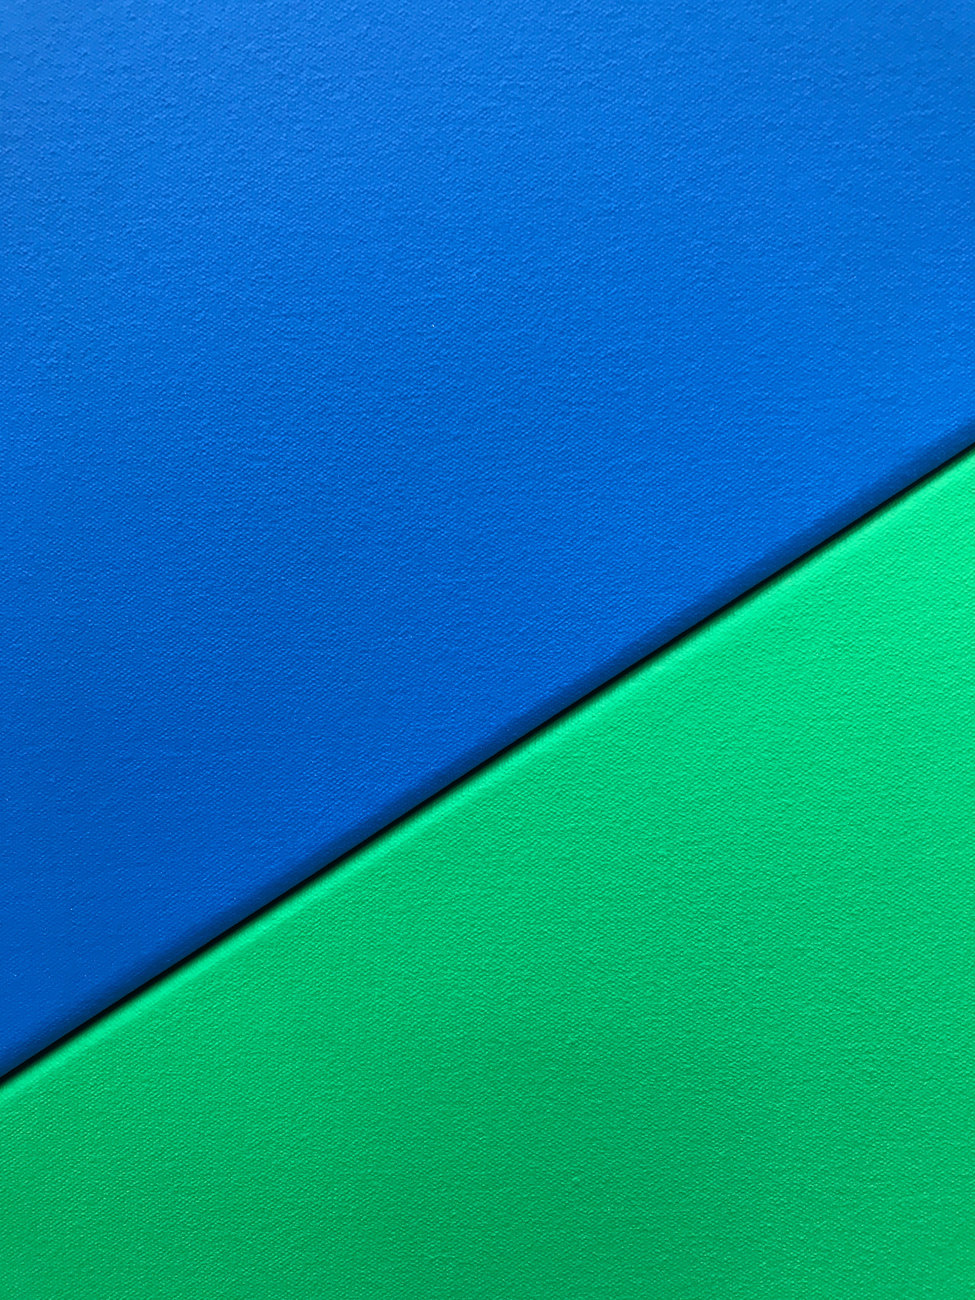 Blue and Green Geometry (2)